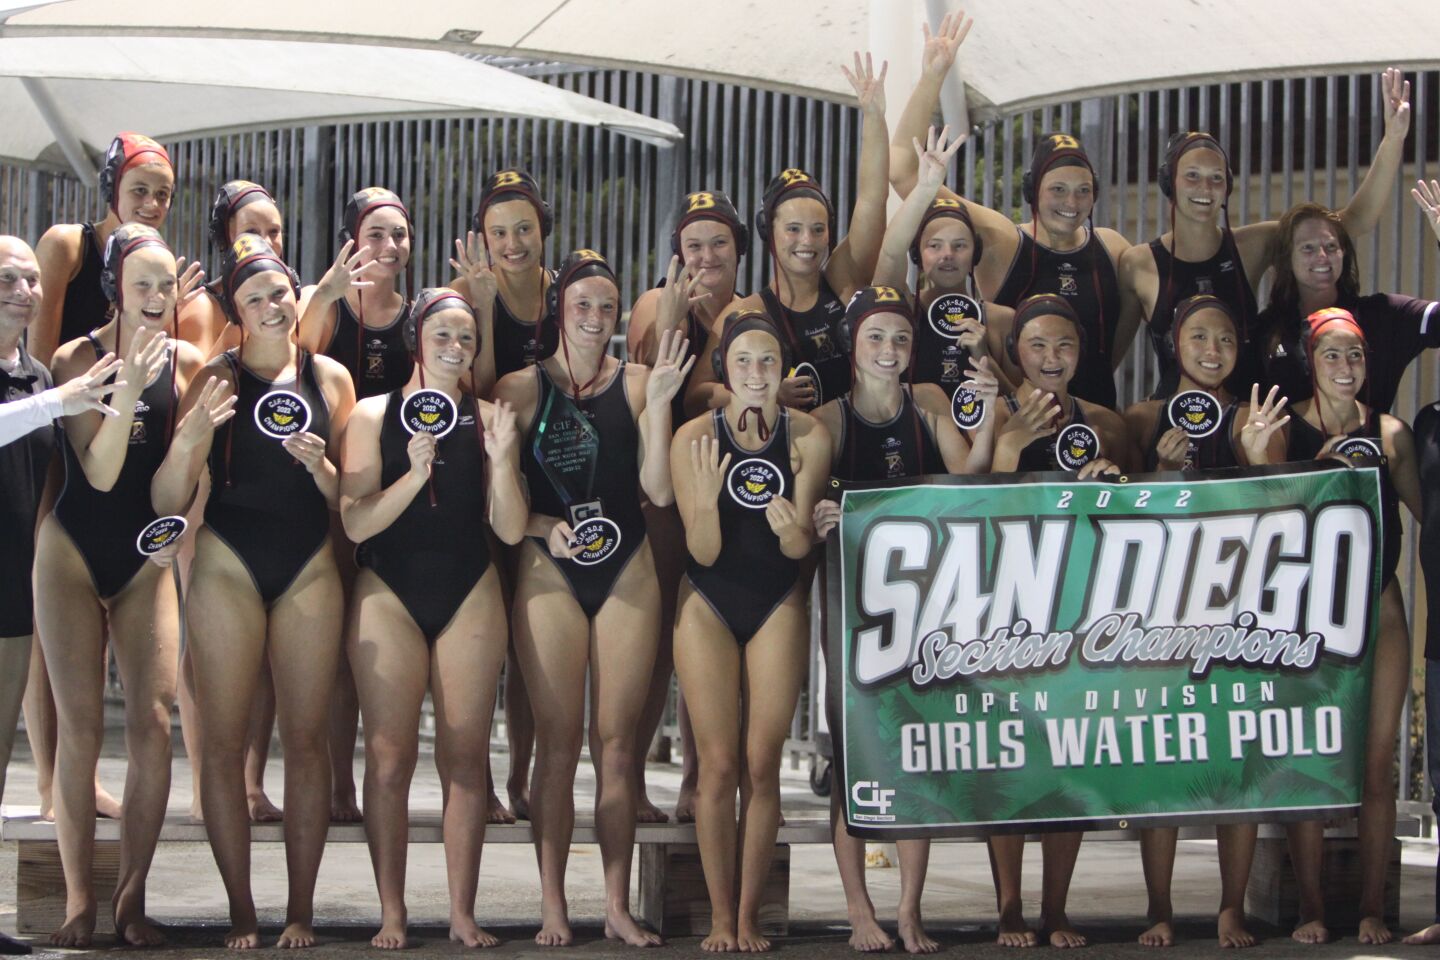 The Bishop's School Knights girls water polo team is the CIF San Diego Section Open Division champion for the fourth consecutive season after defeating Grossmont, 18-1, on Feb. 19.